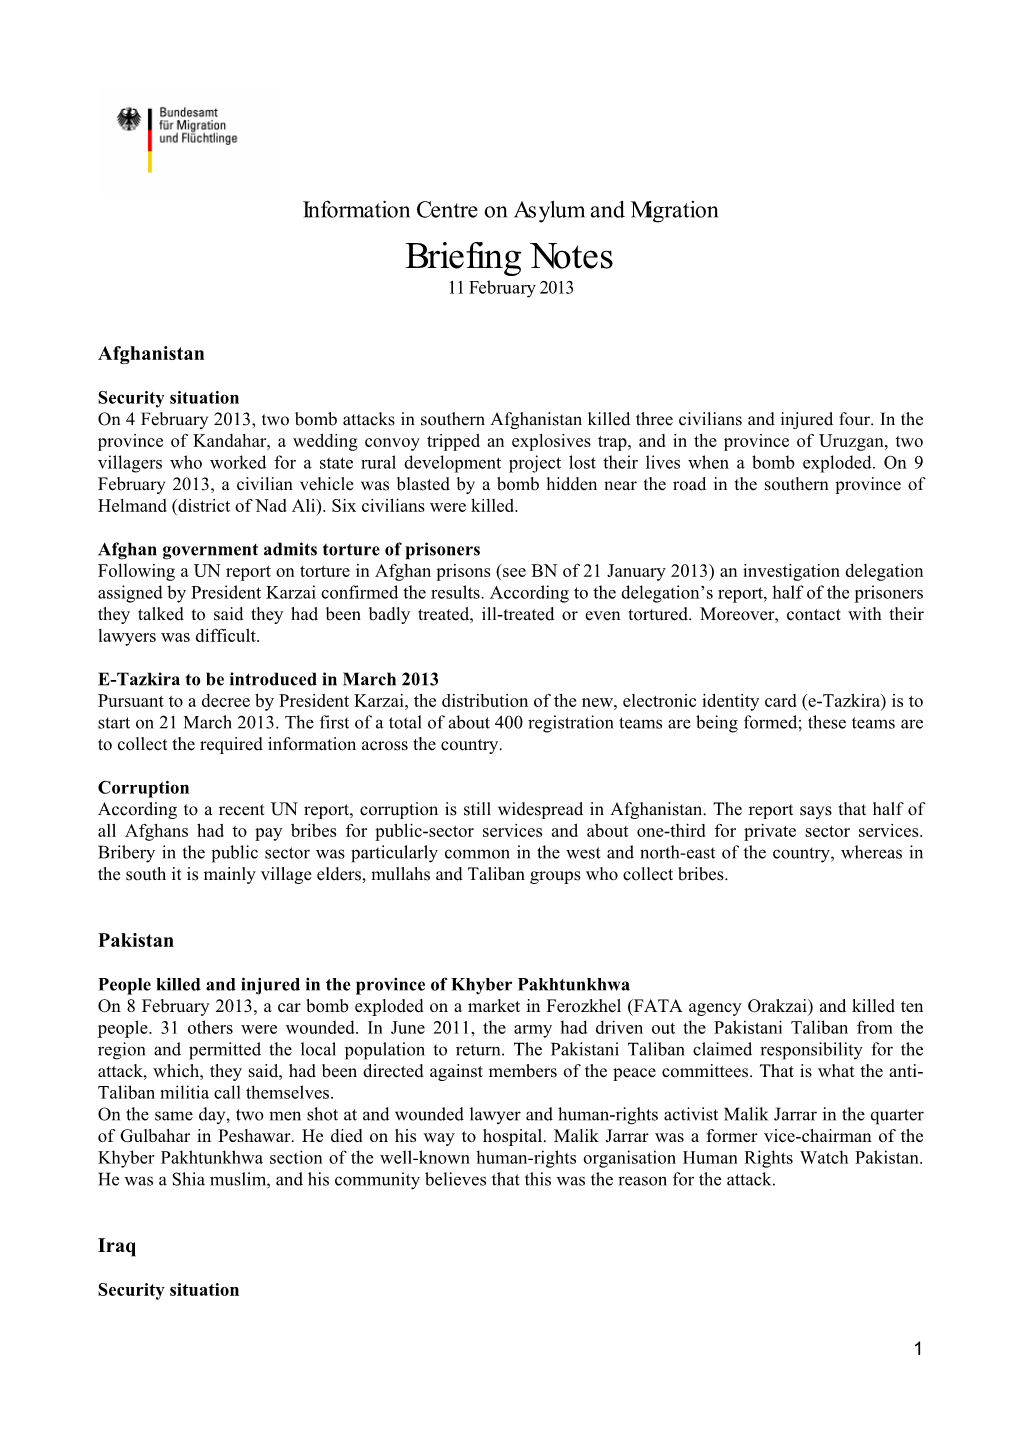 Briefing Notes 11 February 2013